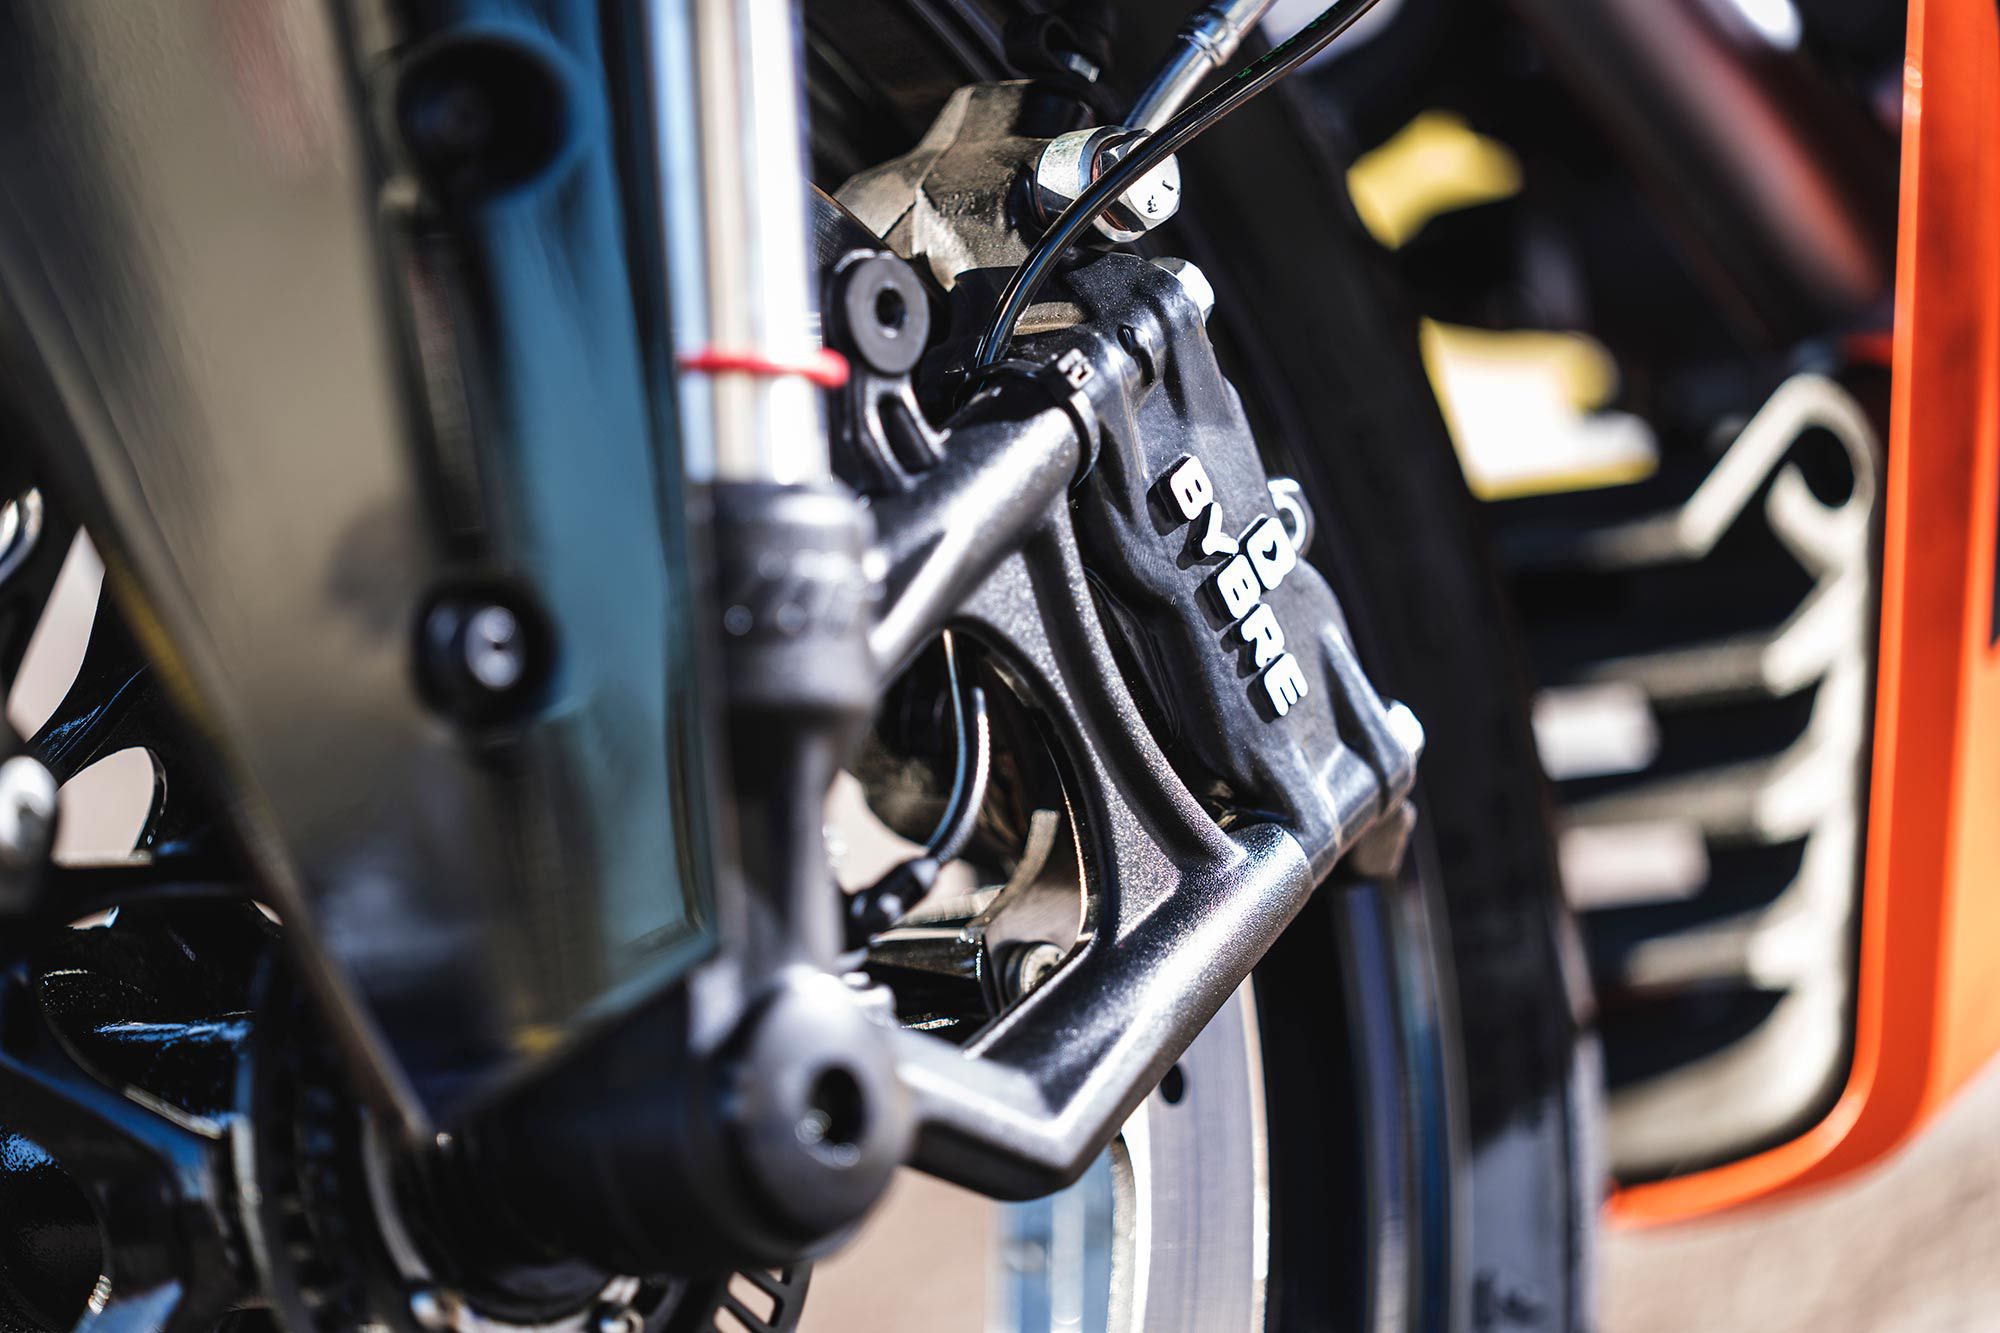 Suspension is provided by WP with a 43mm fork featuring compression adjustment (30 clicks) and rebound adjustment (also 30 clicks).